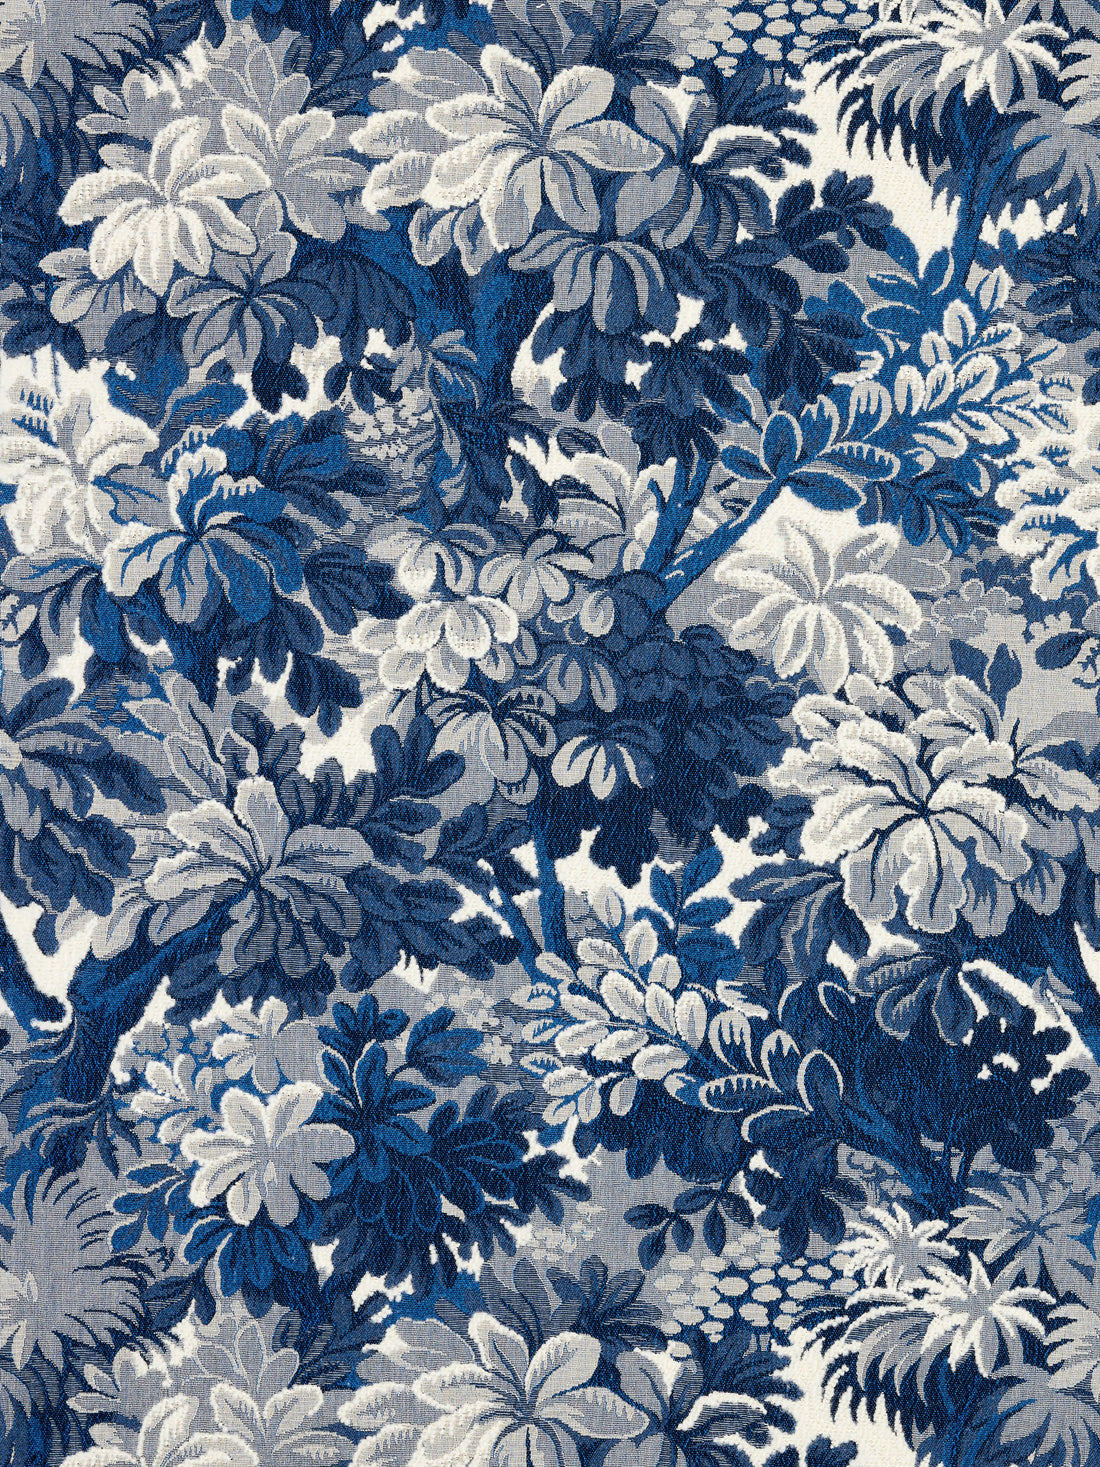 Ridge Edge fabric in blue shadow color - pattern number BZ 0062060W - by Scalamandre in the Old World Weavers collection